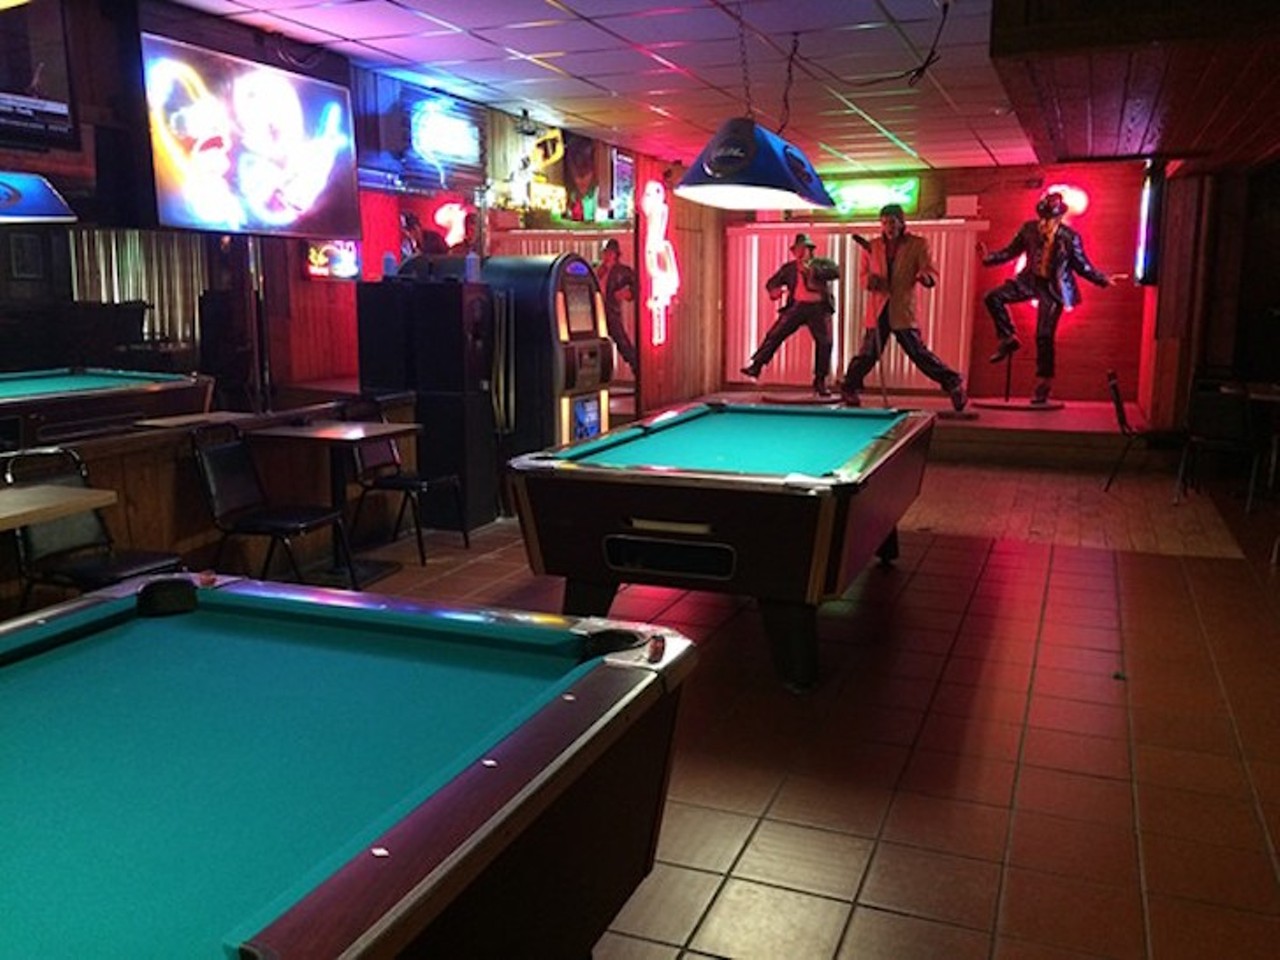 Whiskey Lou&#146;s Lounge 
121 N Bumby Ave.,407-896-2593
Whiskey Lou&#146;s Lounge is about as classic a dive bar as you can go to. They have pool tables, a jukebox and live music throughout the week per the new management.
Photo by Amanda Reh